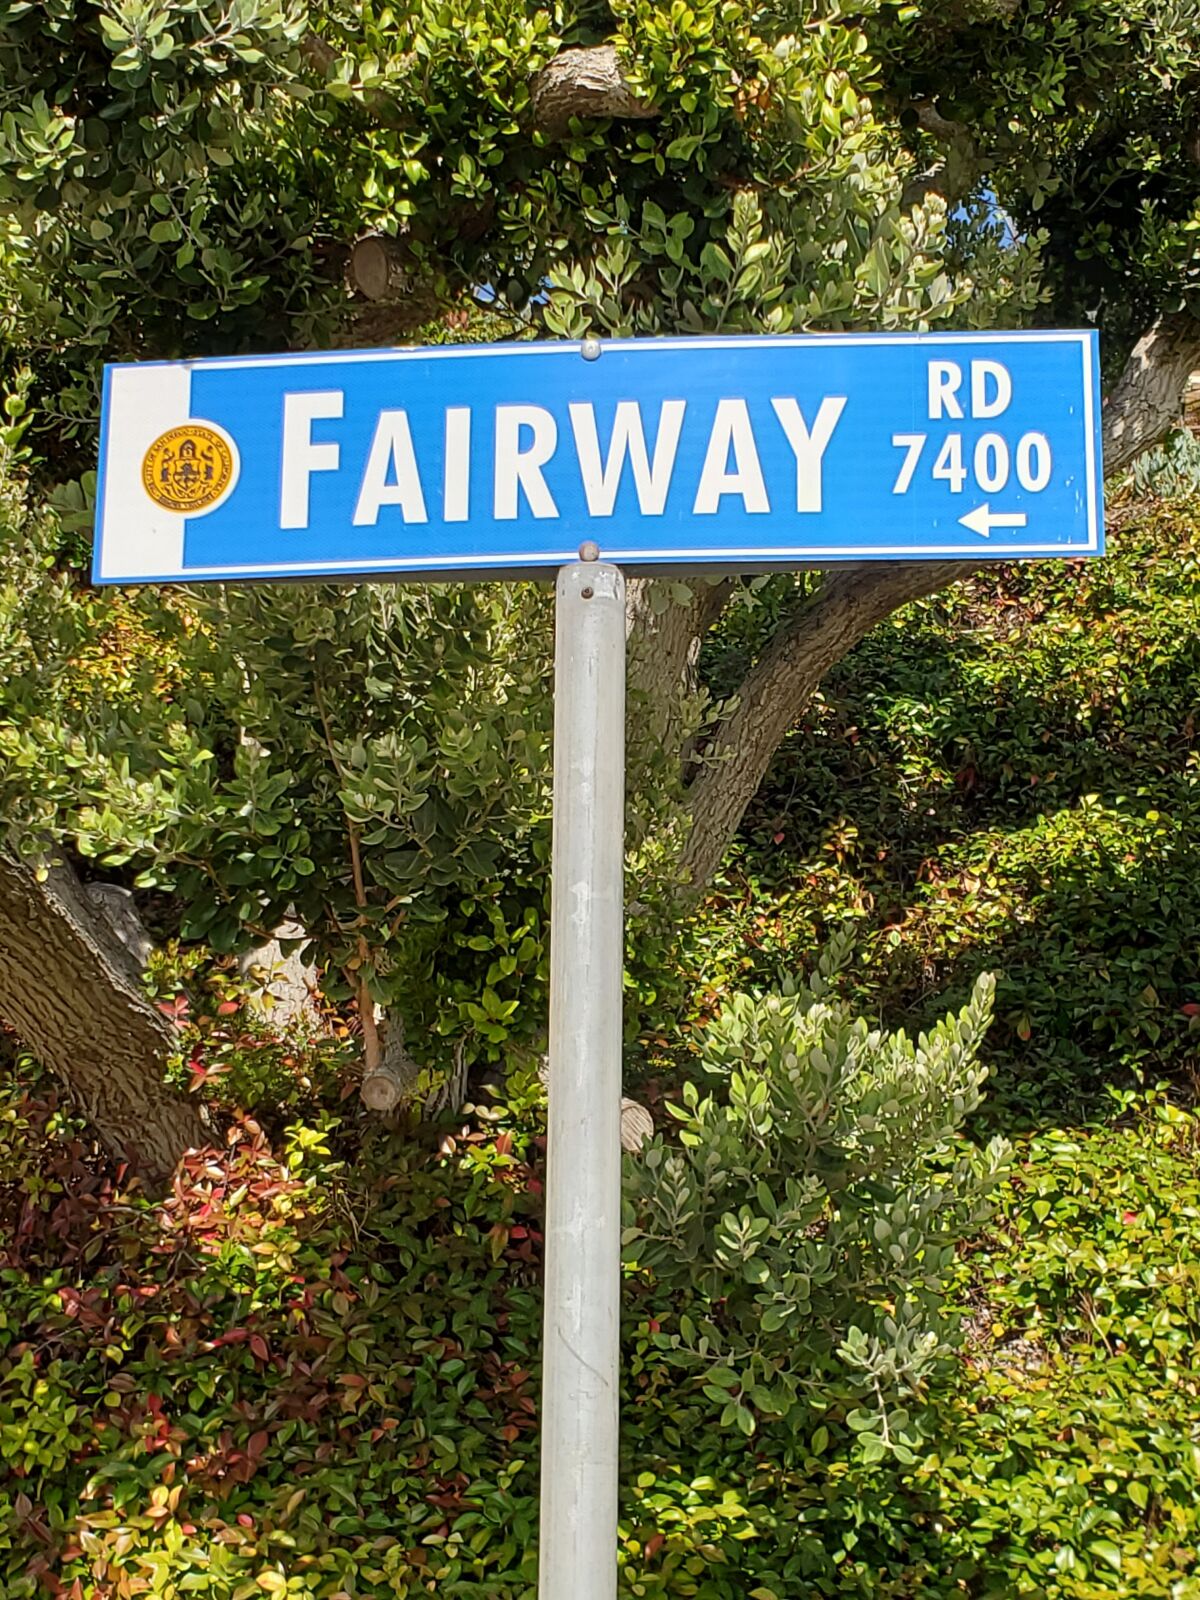 Fairway Road is a short street in the Country Club area of La Jolla.